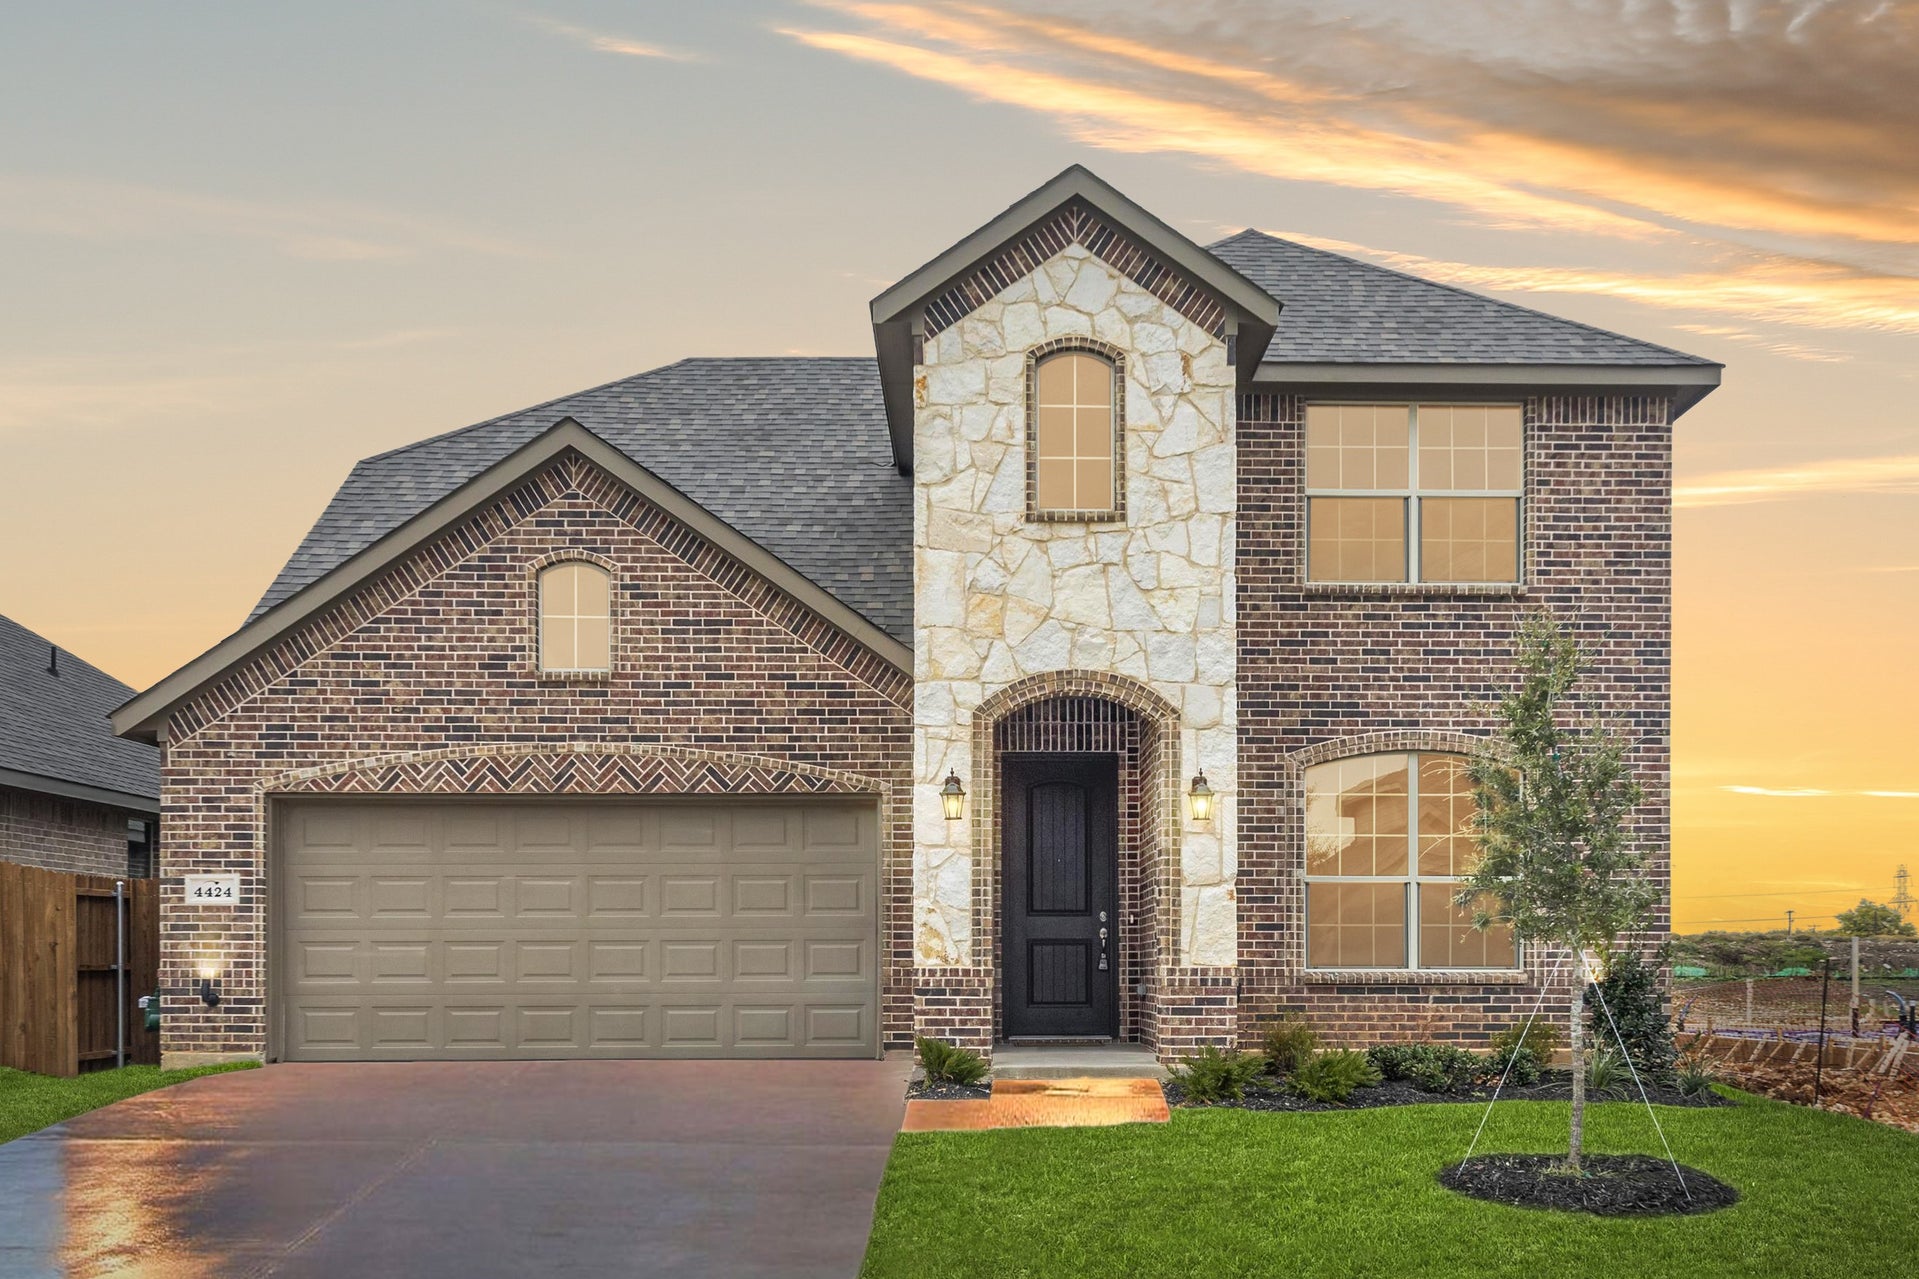 2440 A with Stone. 3br New Home in Joshua, TX